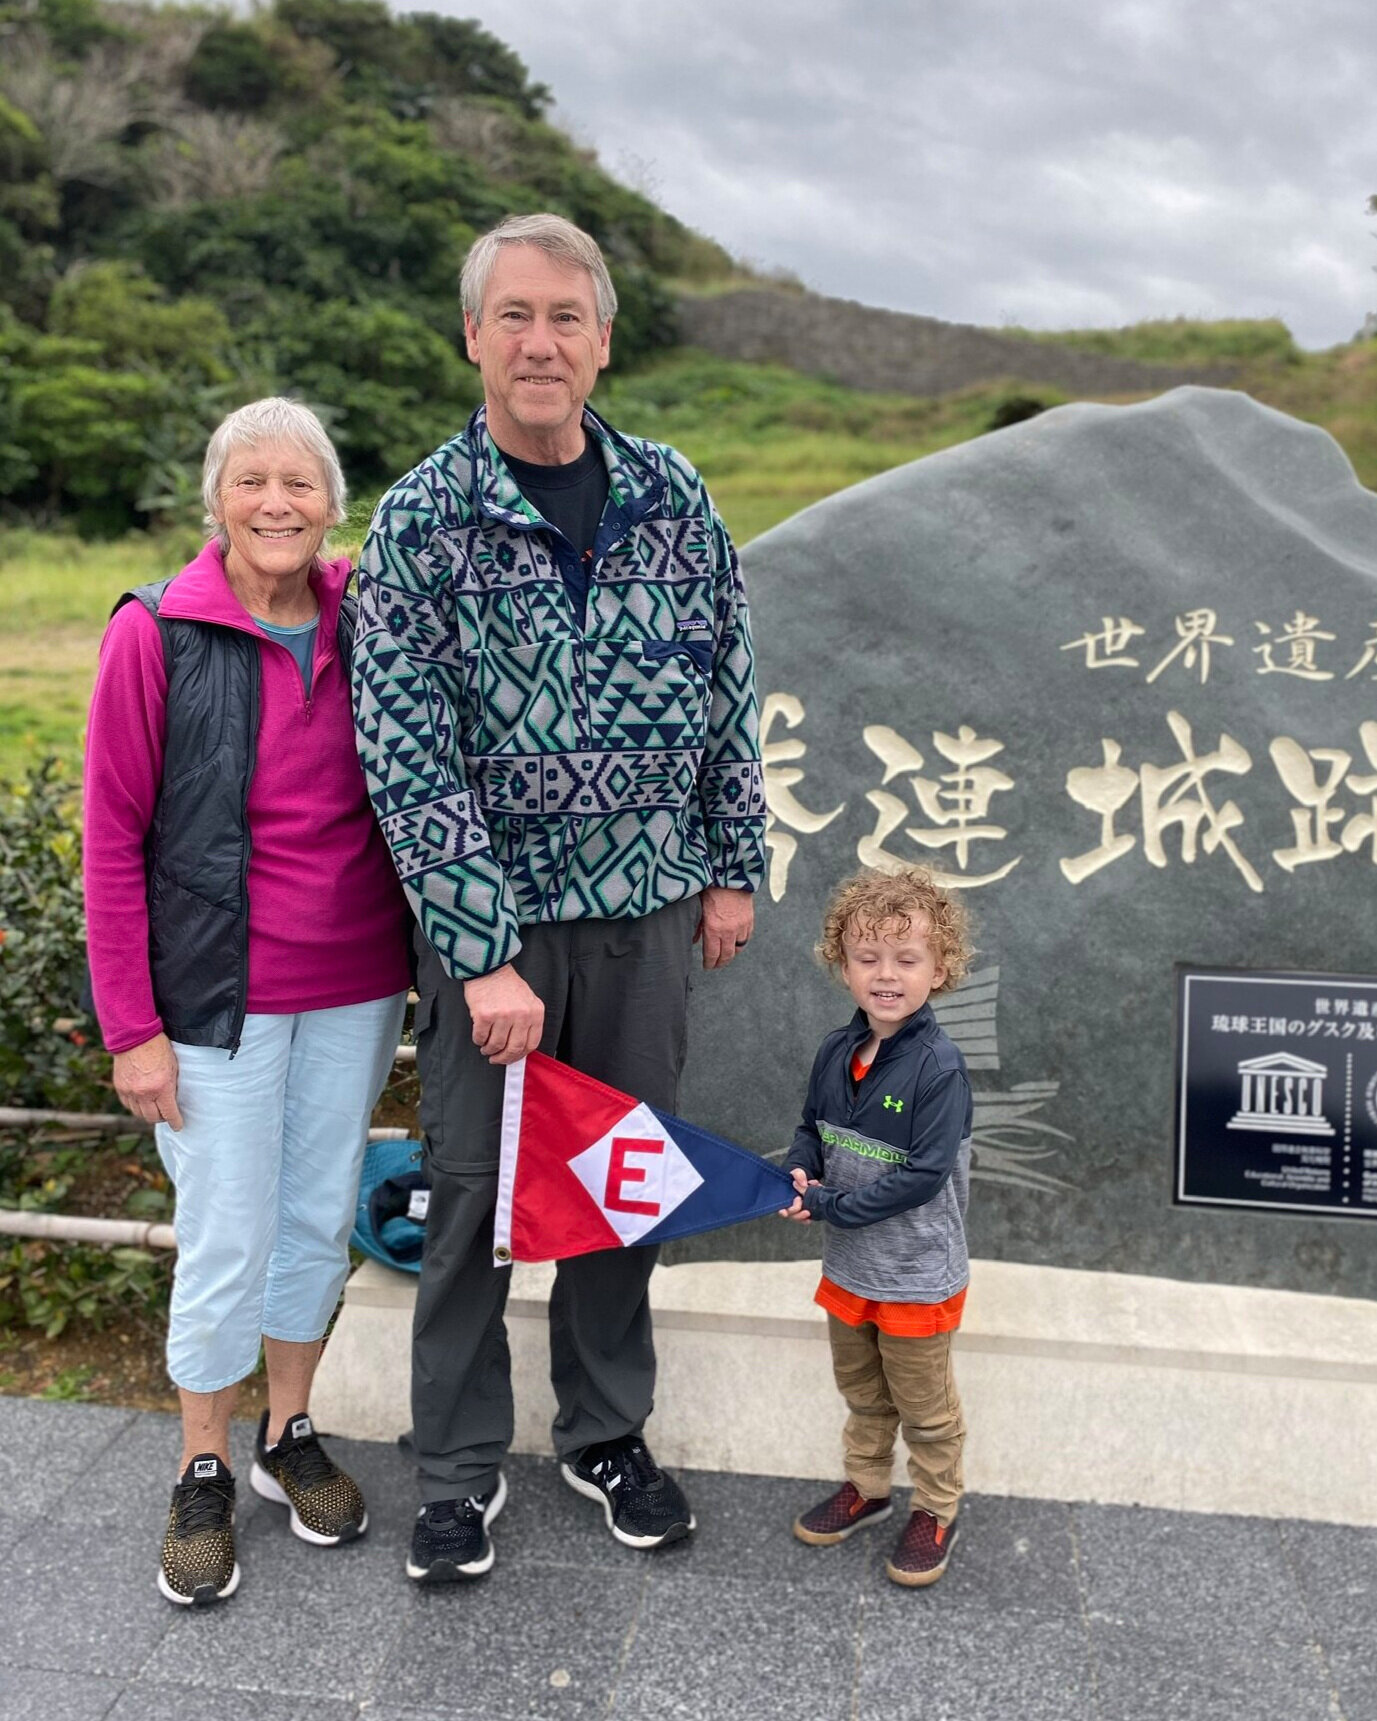  Bill &amp; Vicky show their colors at Katsuren Castle in Okinawa, Japan 